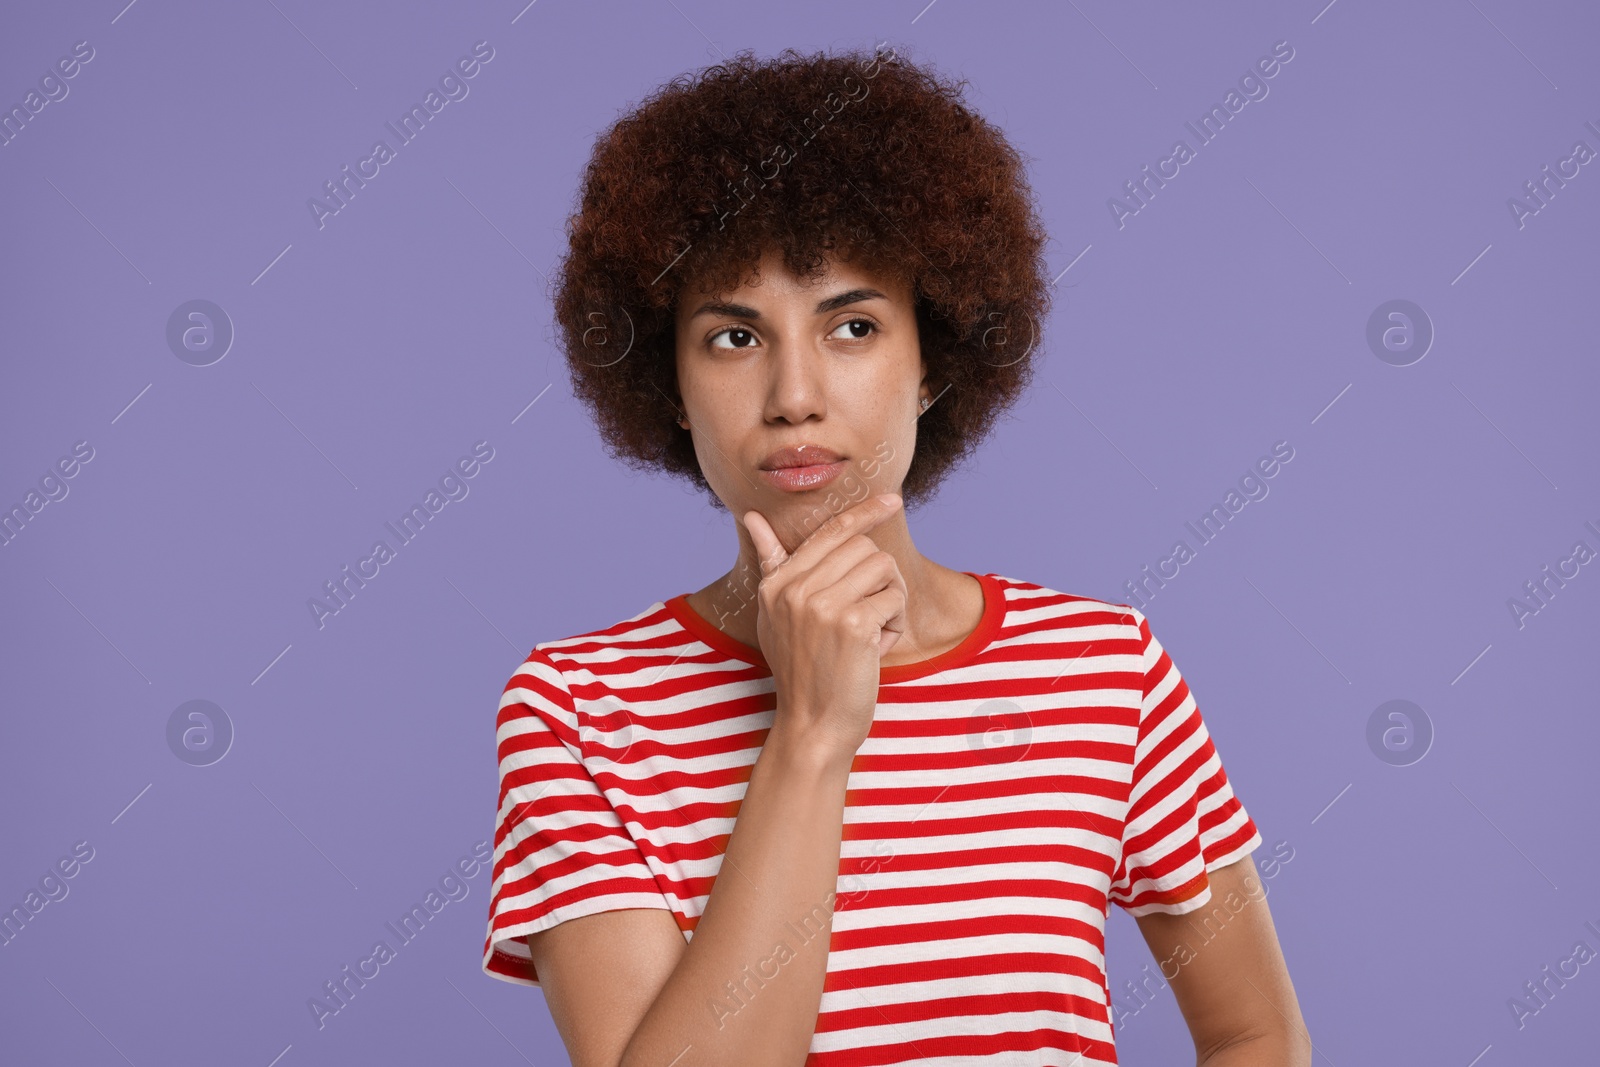 Photo of Portrait of thoughtful young woman on purple background